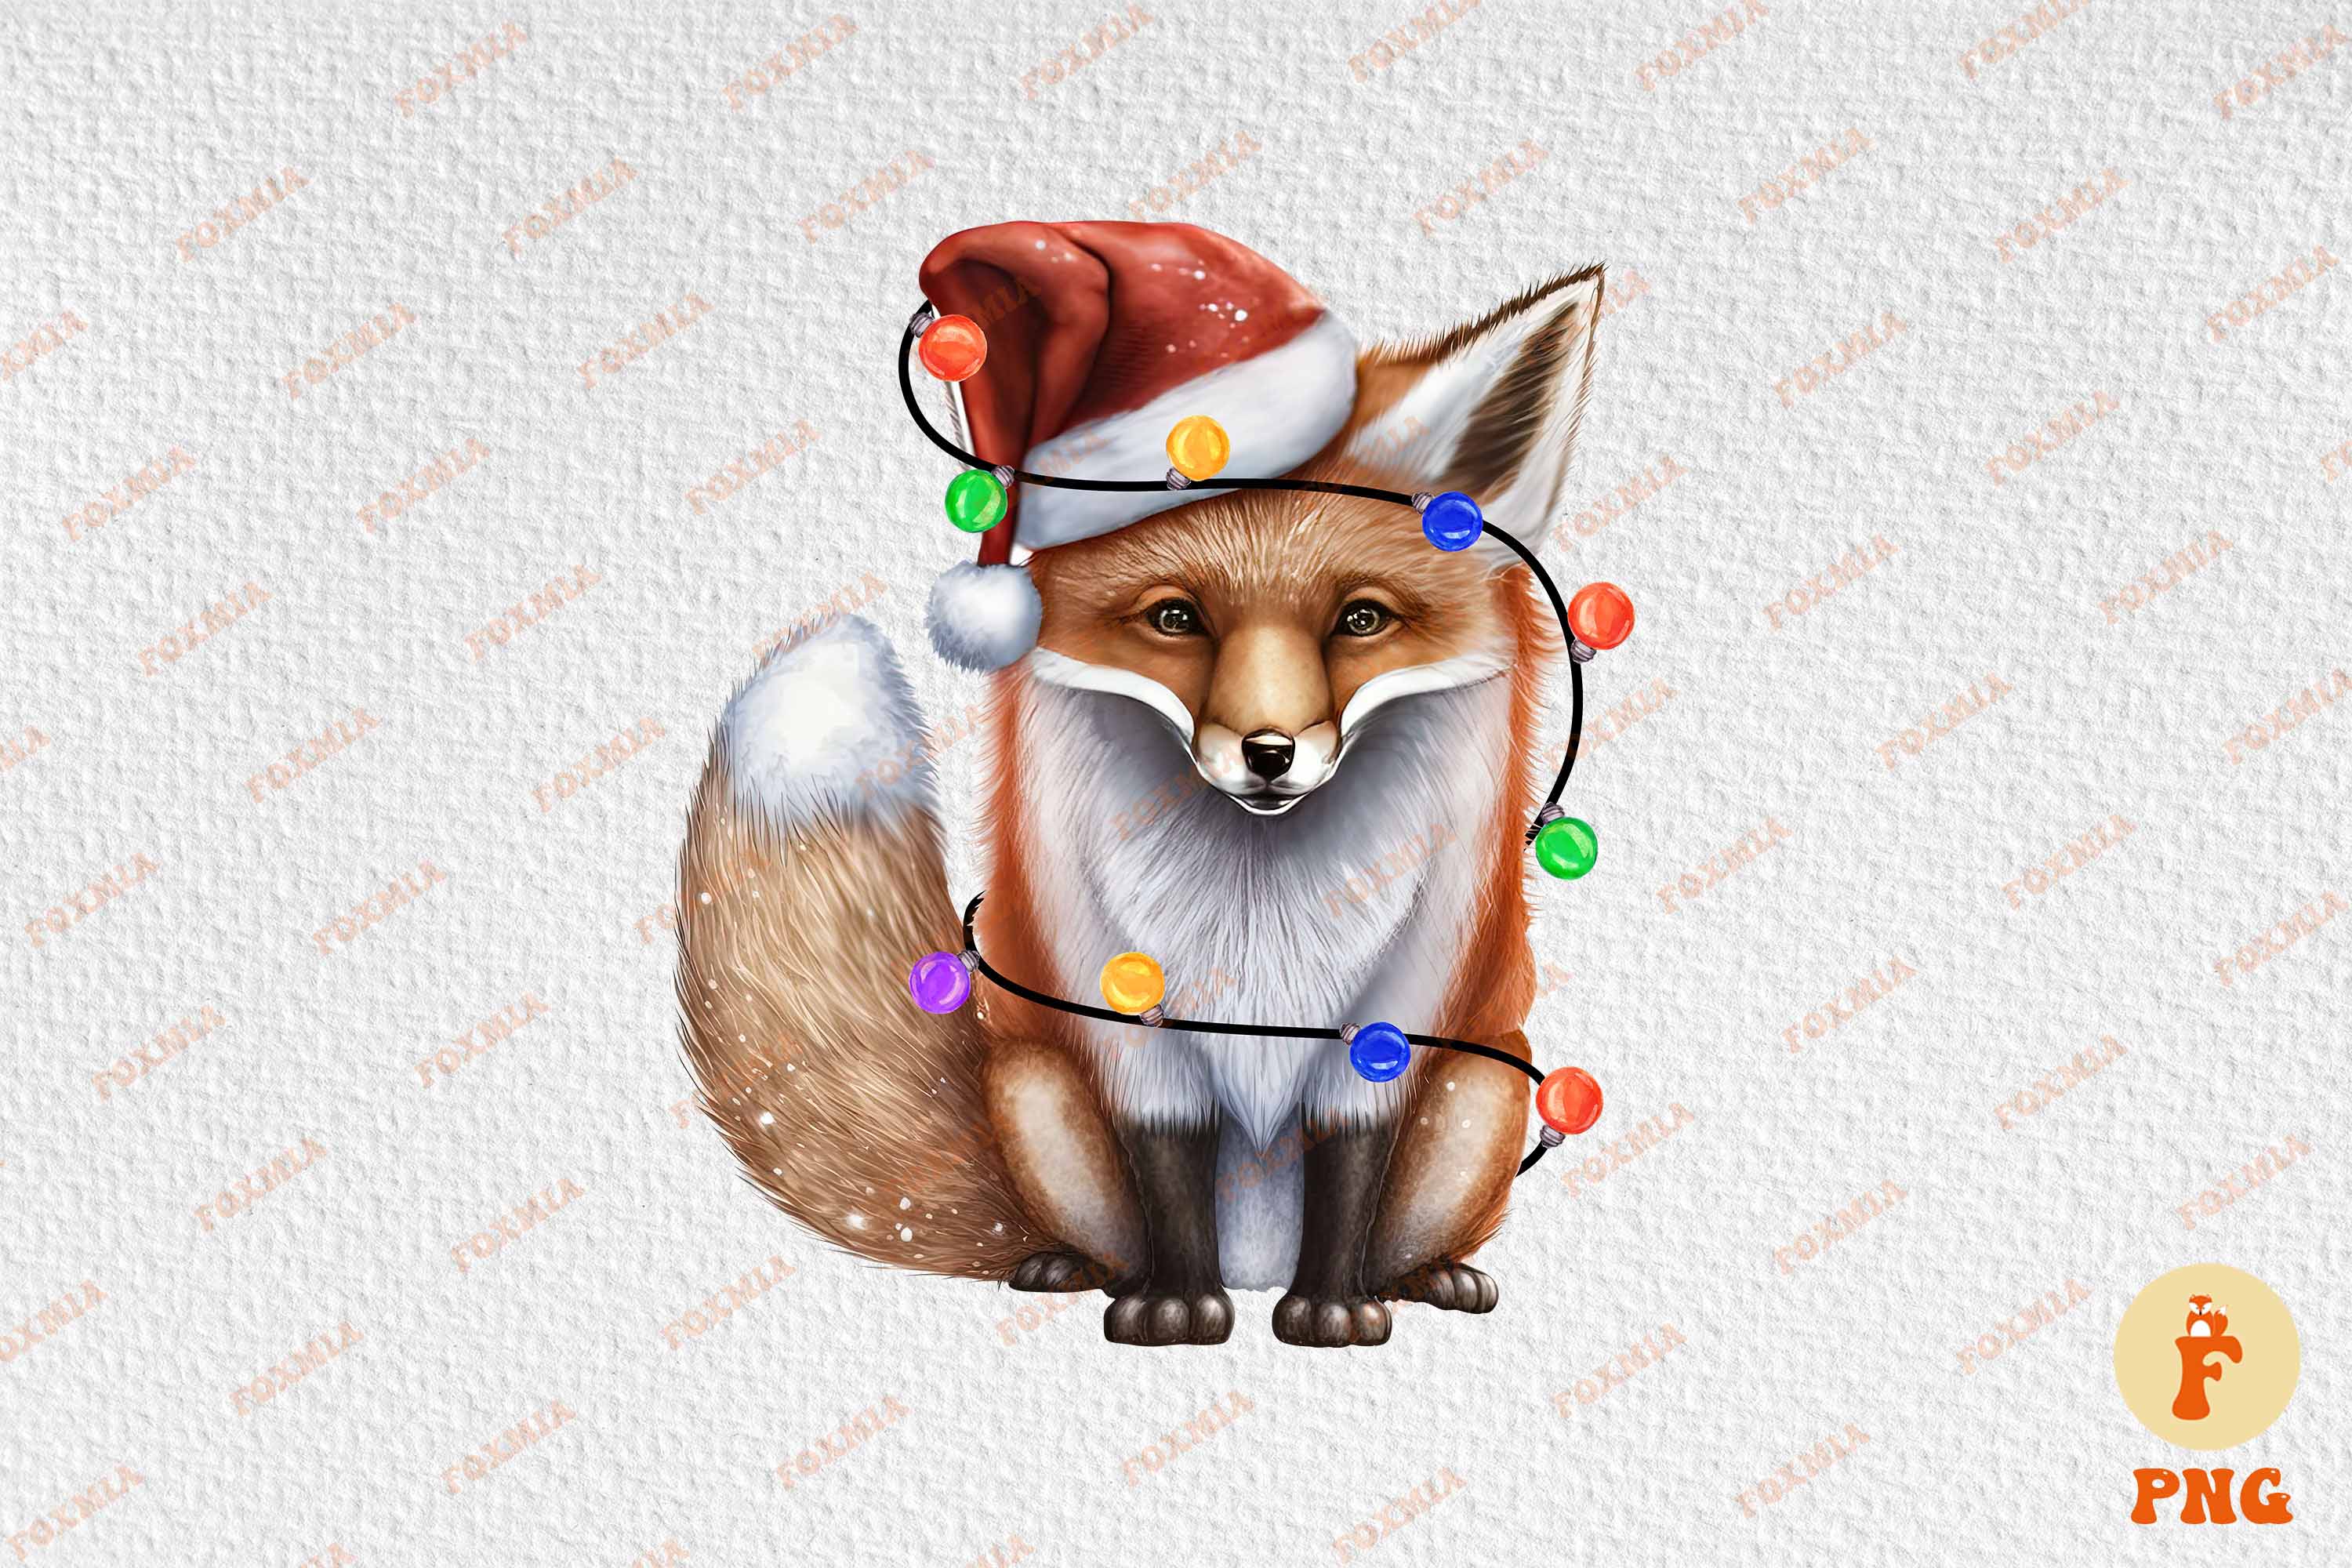 Adorable image of a fox in a santa hat.